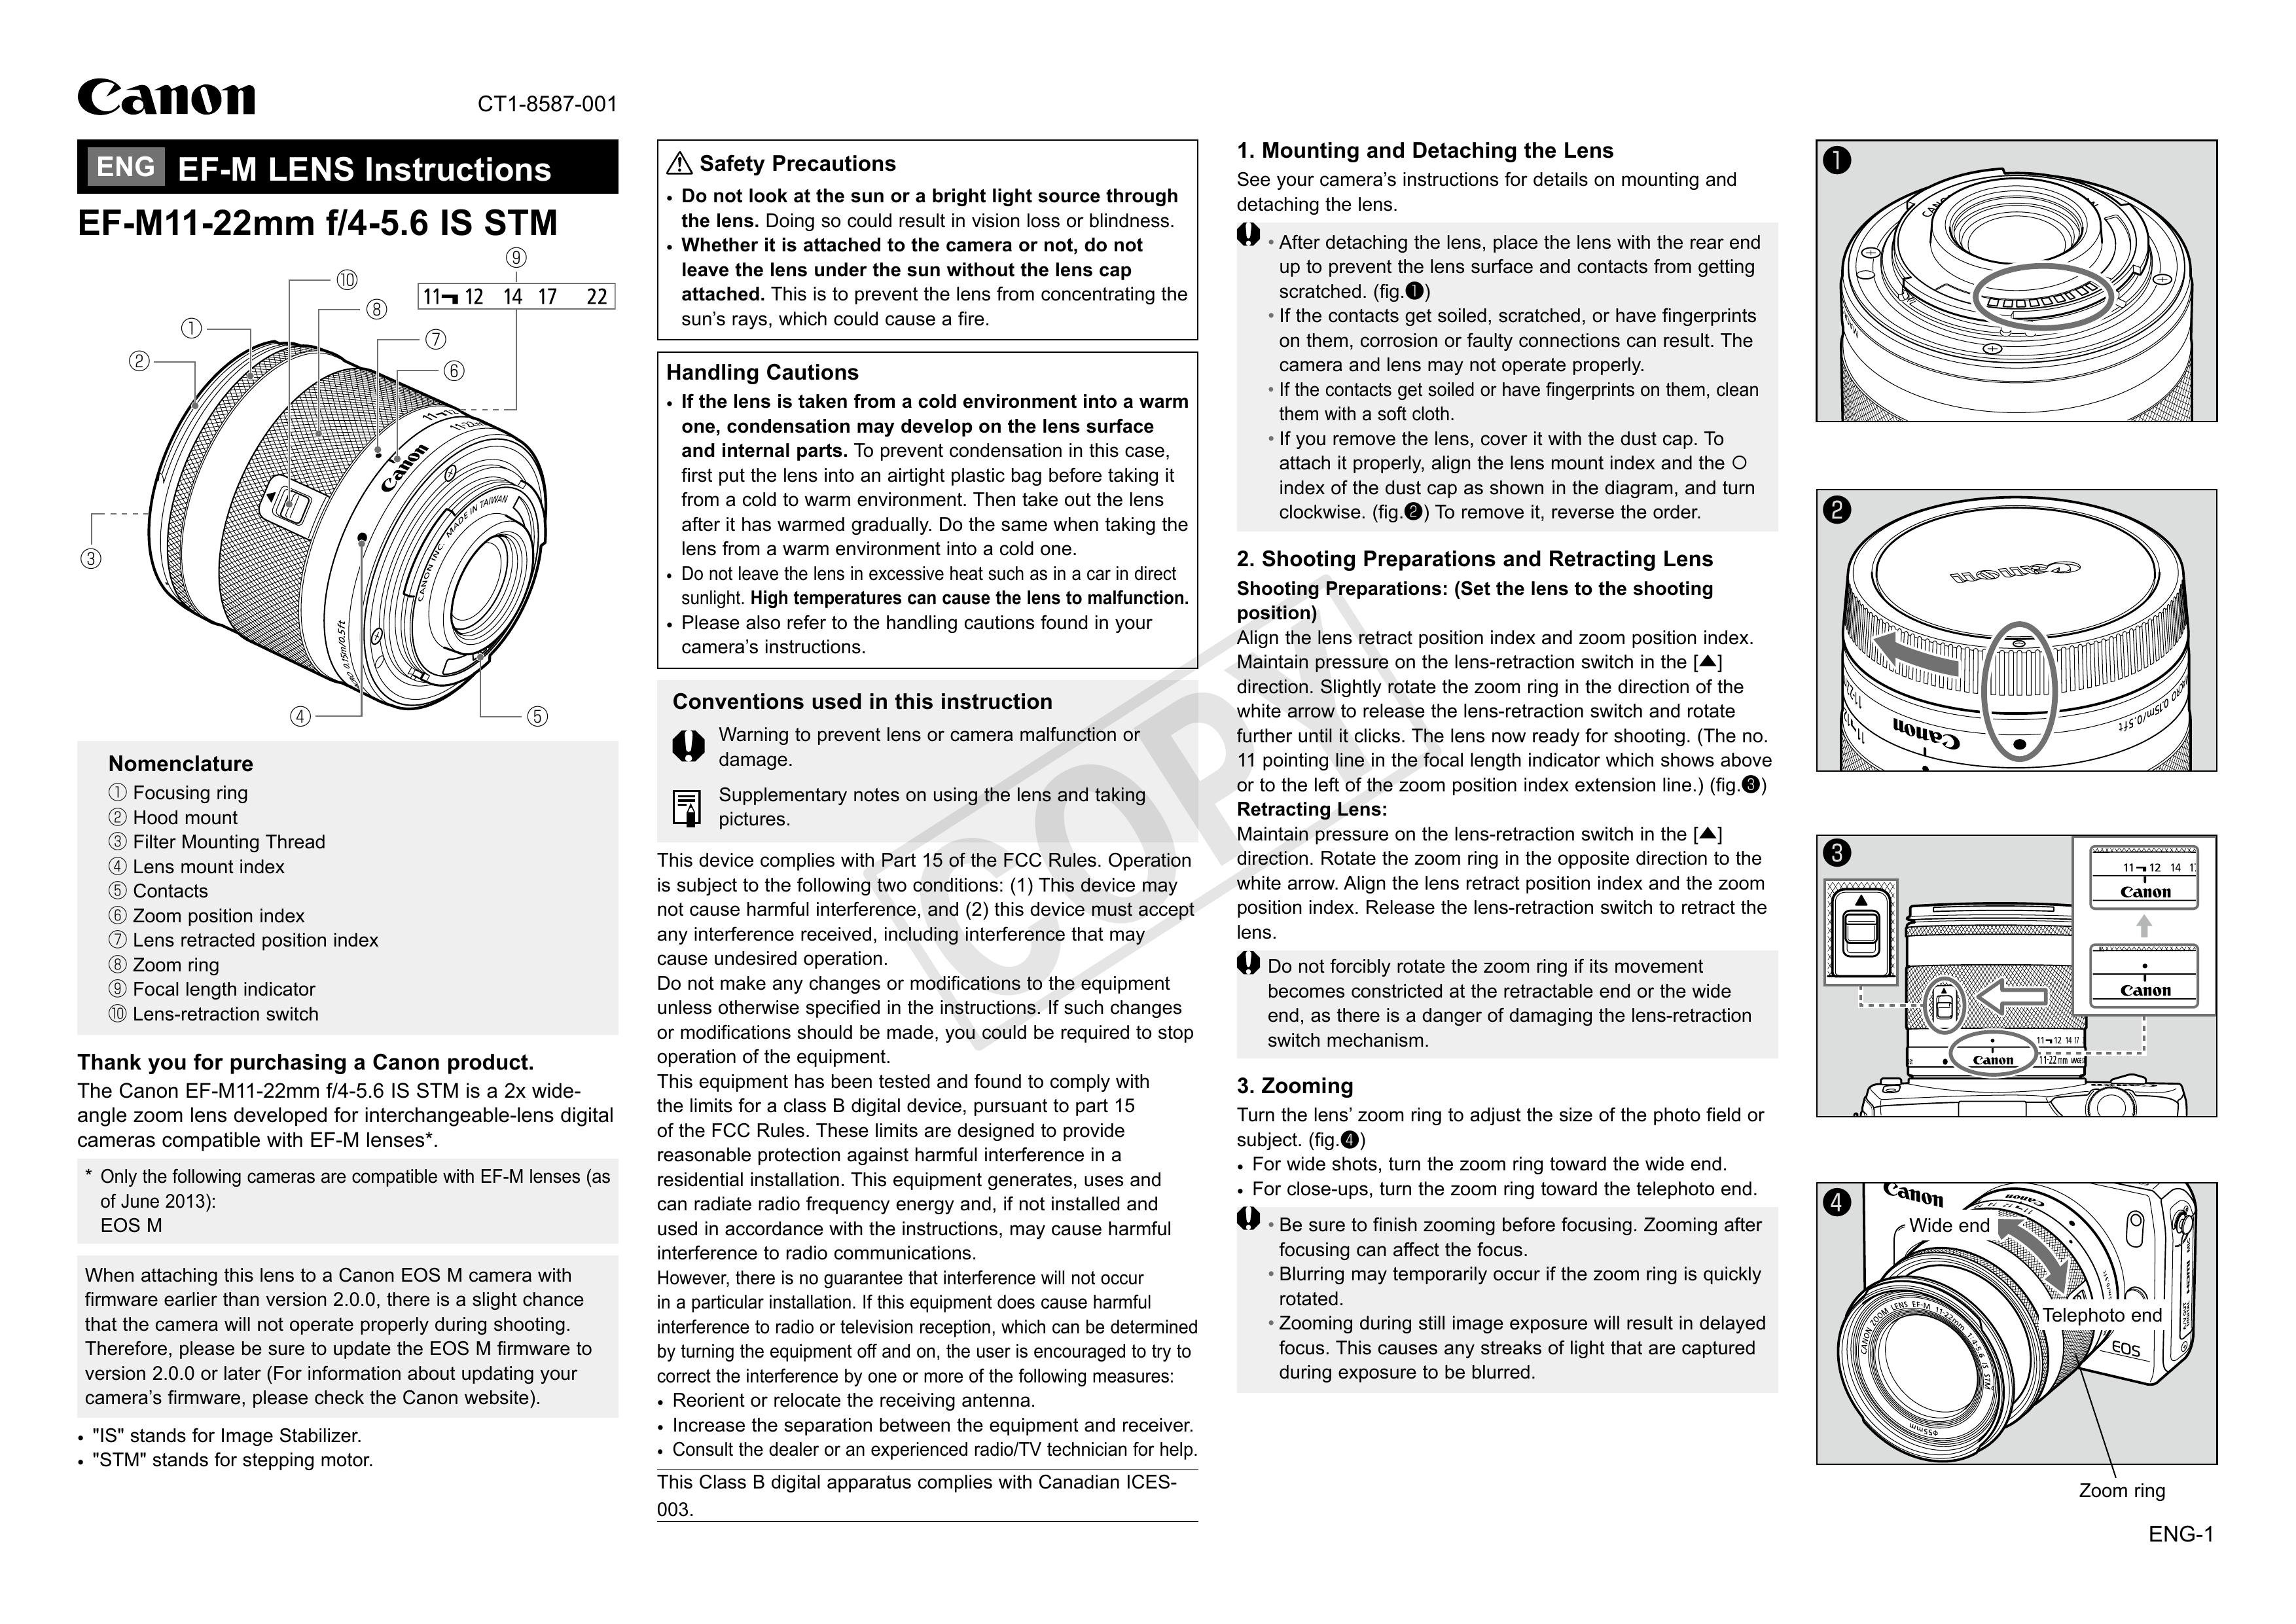 Canon 11-22 F4-5.6 IS STM Camera Lens User Manual